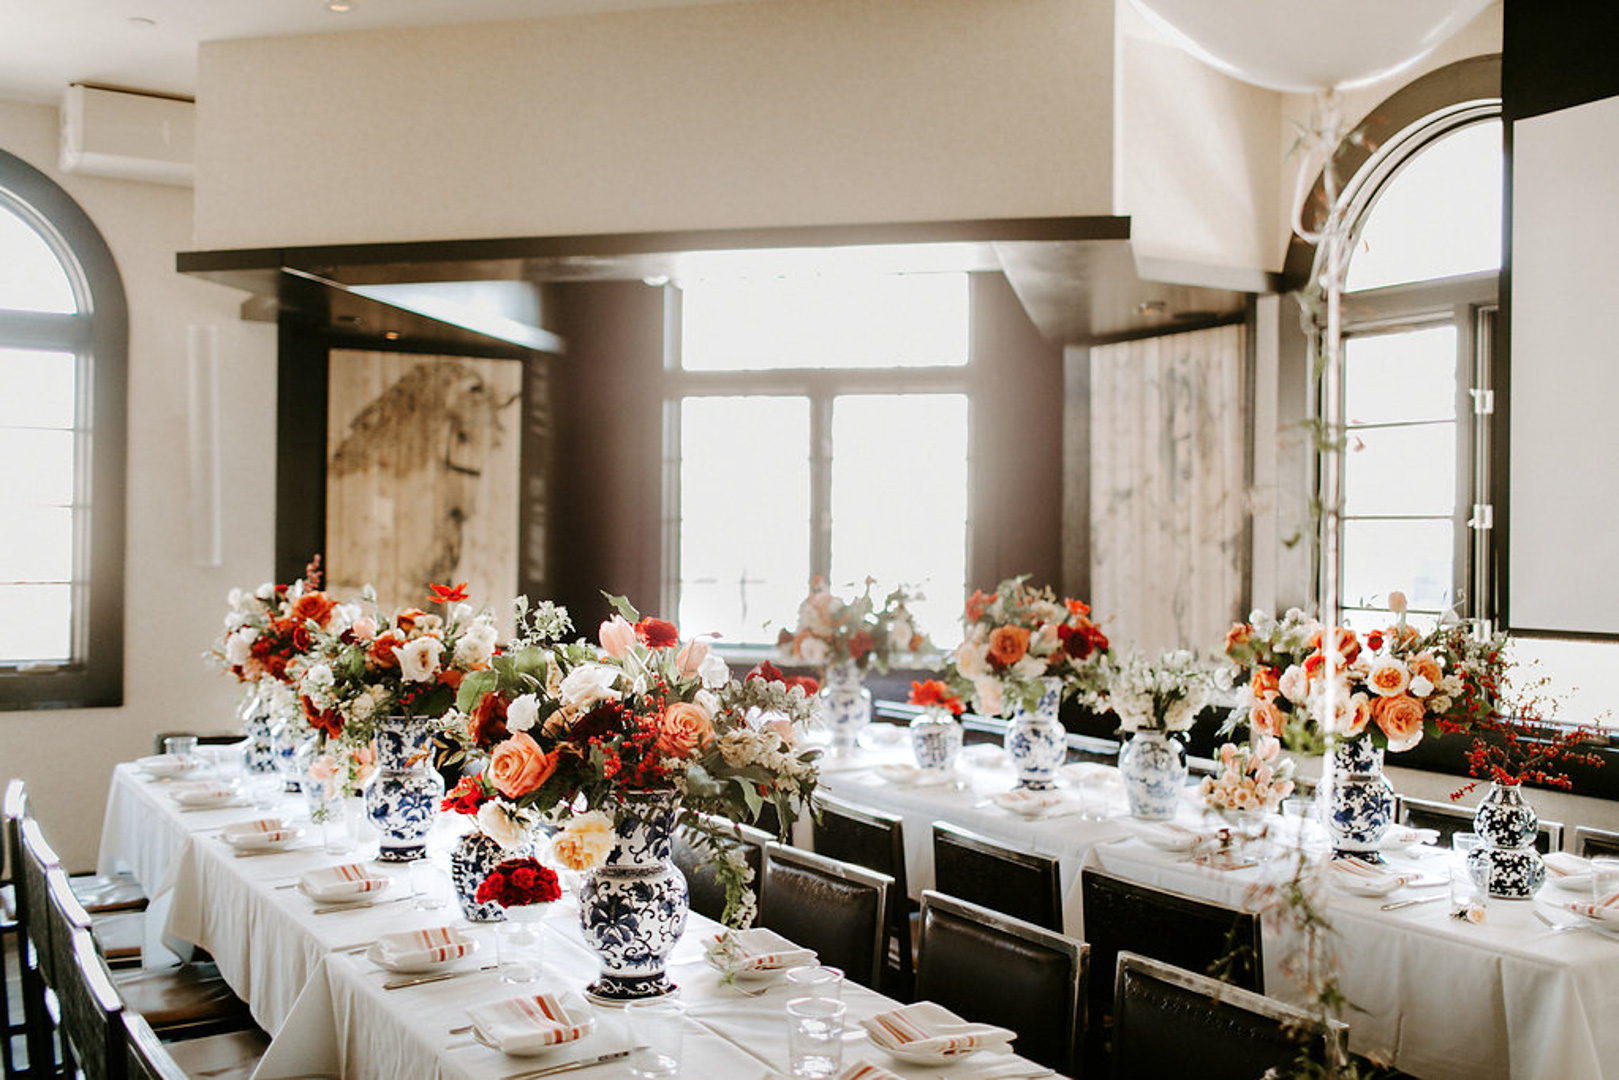 Jackie Roque's Spanish themed bridal shower in Miami featuring Ever After Florlals and blue and white porcelain vases.